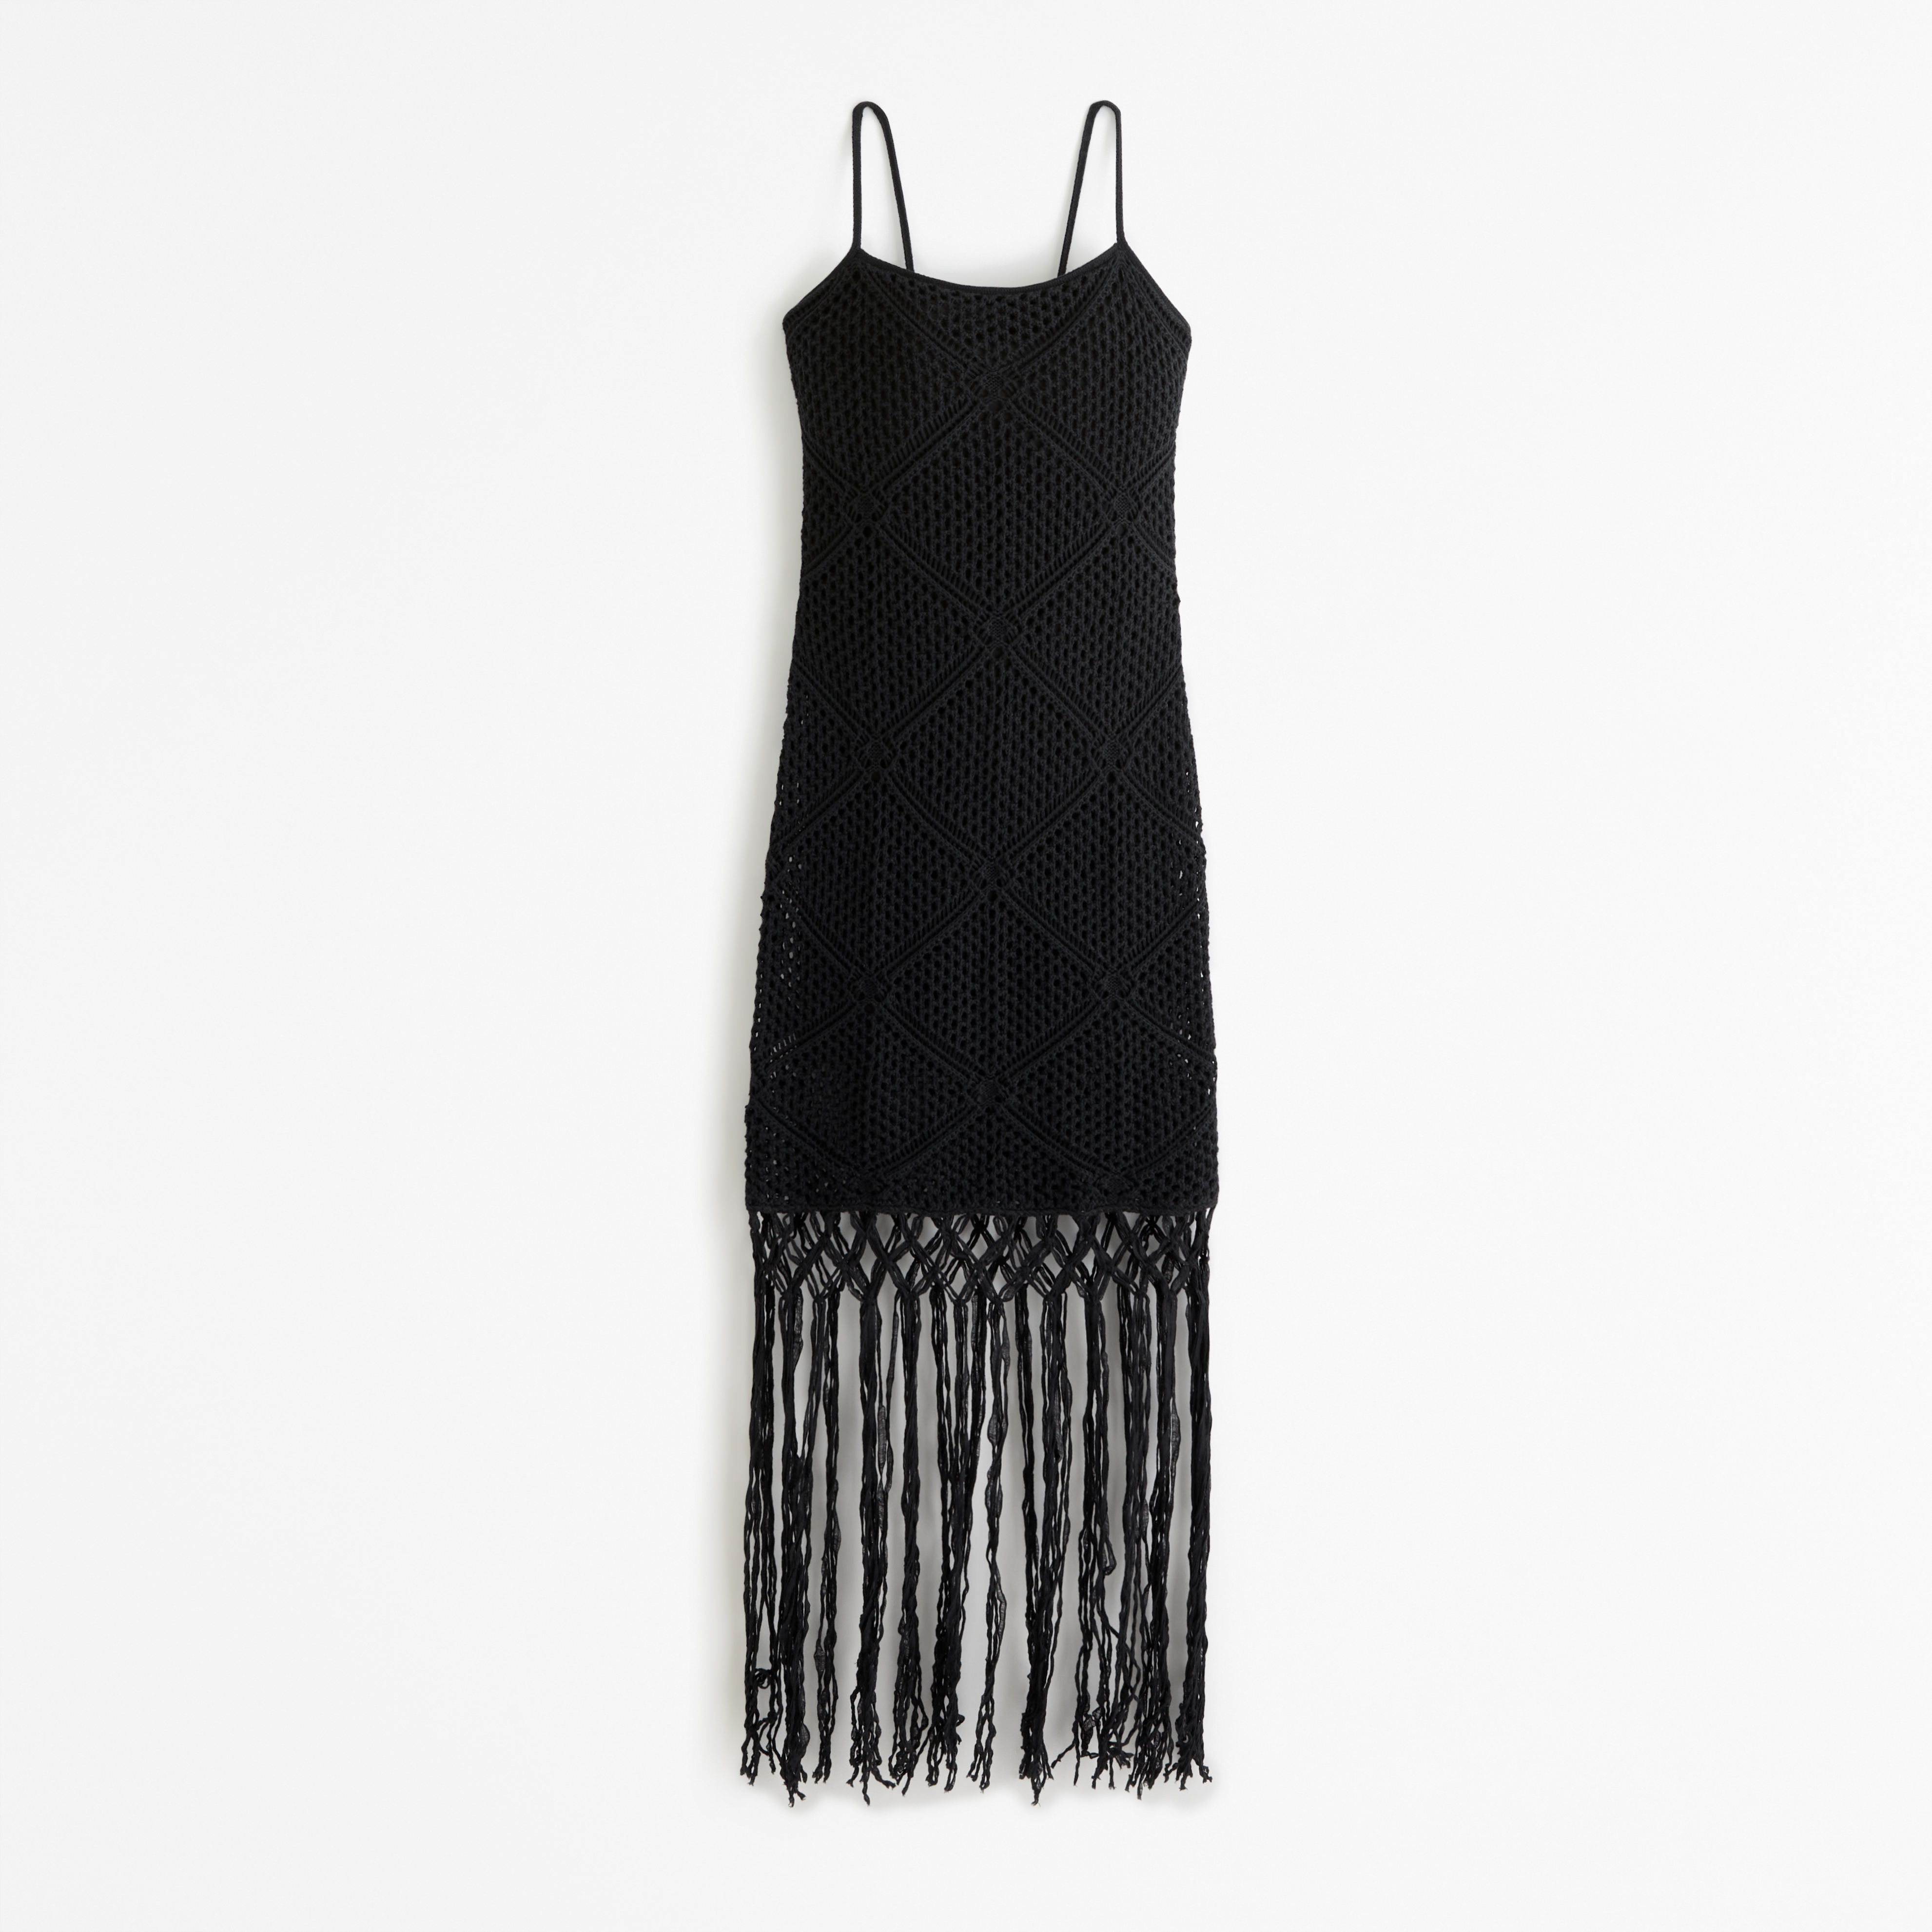 Feather, crochet and fringe dress